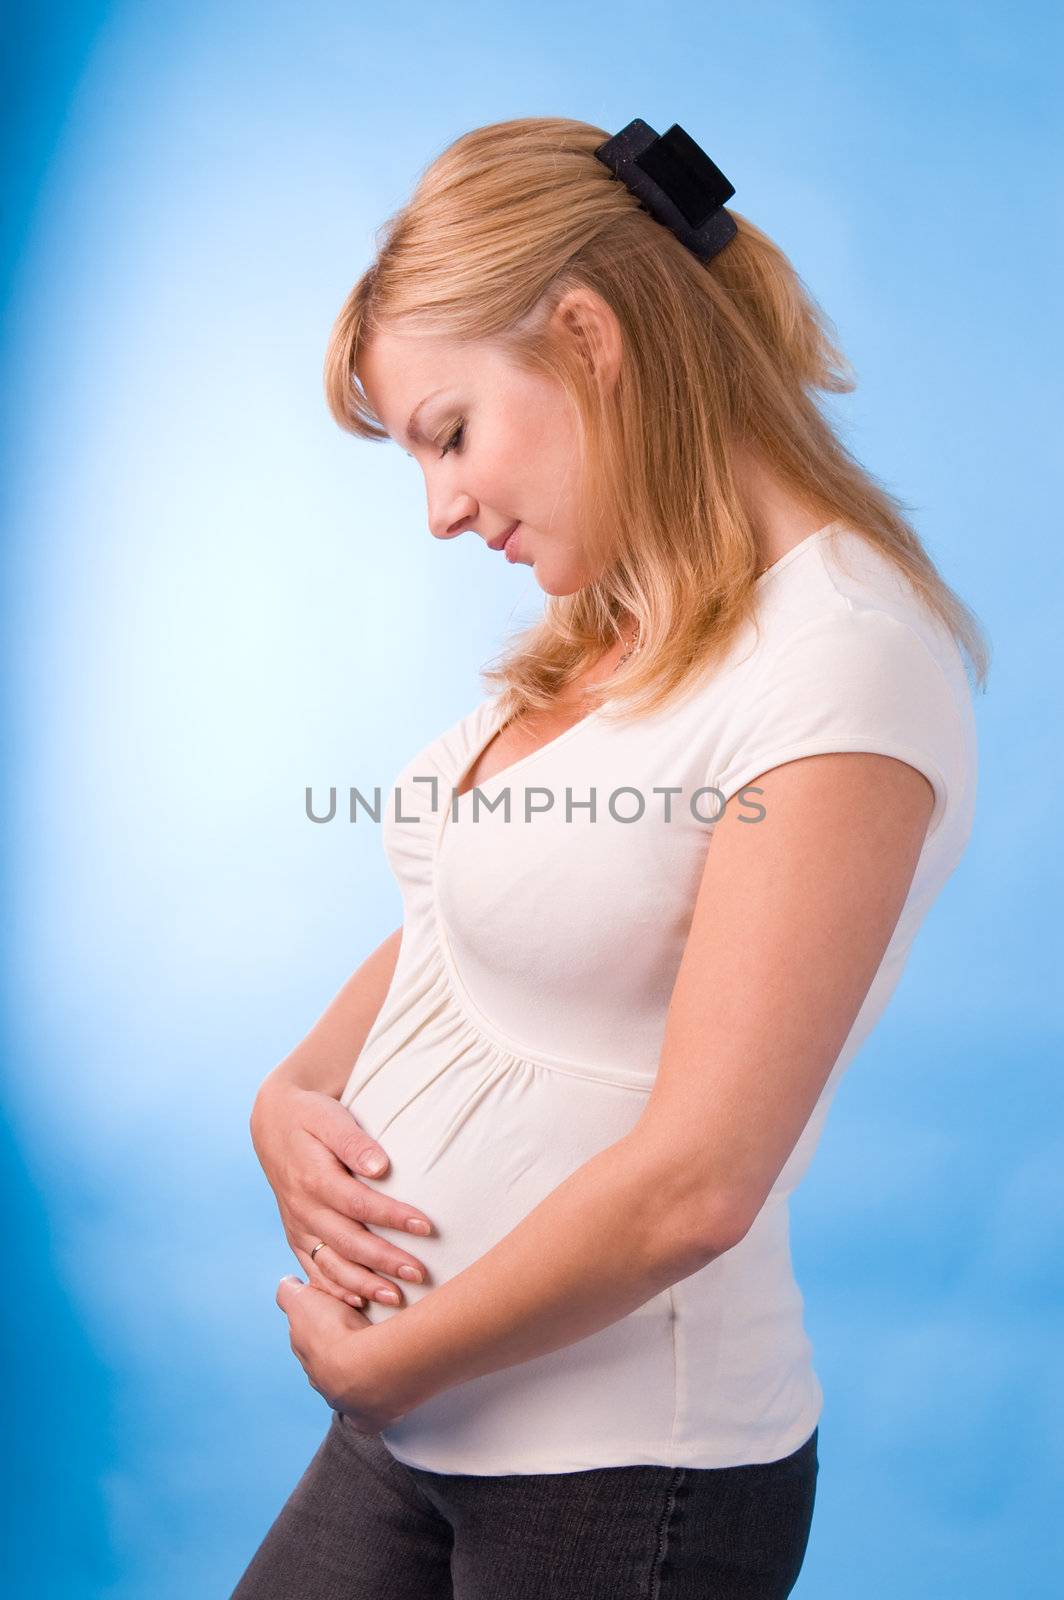 The fine pregnant woman supports hands a stomach